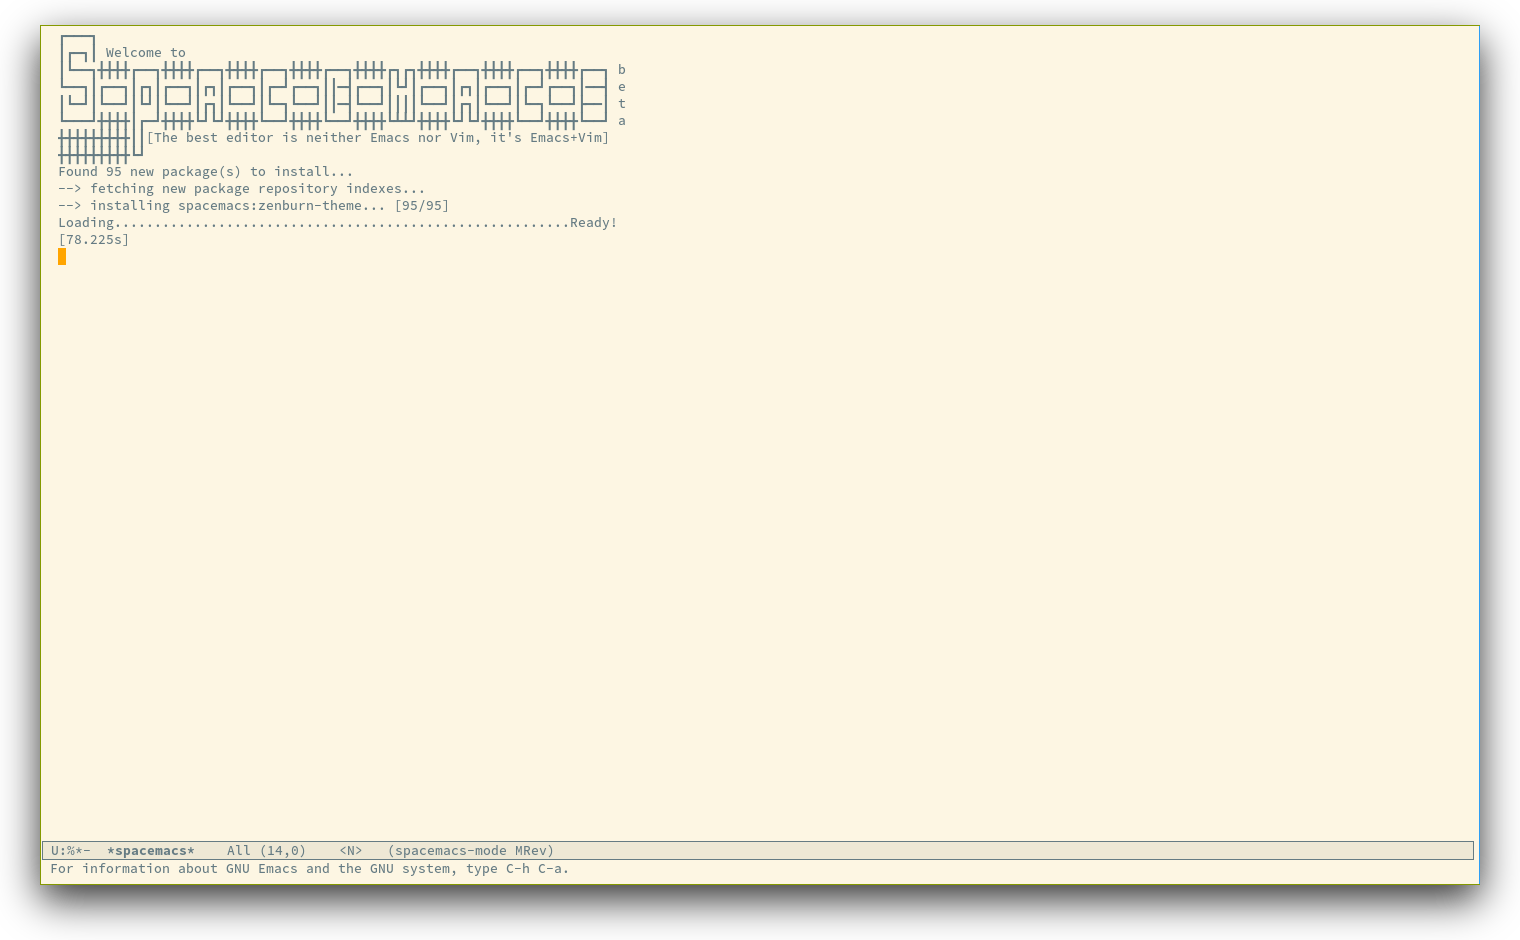 /TakeV/spacemacs/media/commit/9874e0c12cd3f35166e7222786c64858a947bfeb/doc/img/spacemacs-startup.png